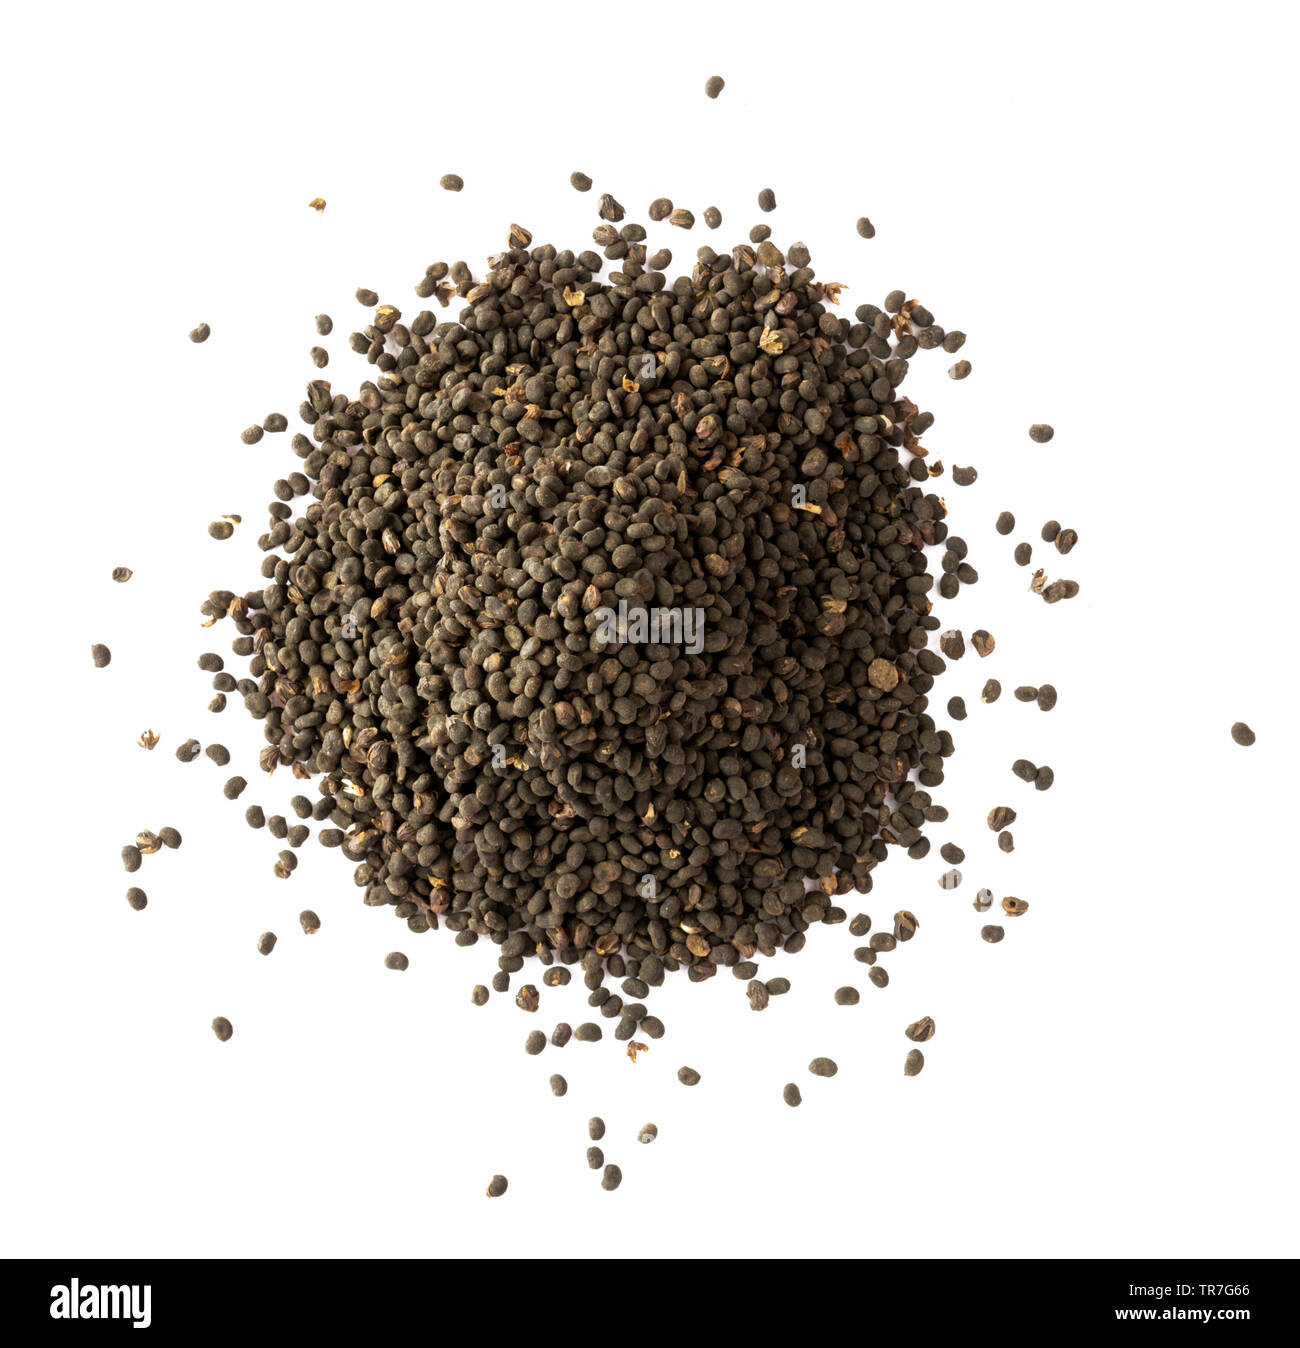 Babchi dry whole seeds isolated on white background. Bakuchiol concept. Design template. Stock Photo